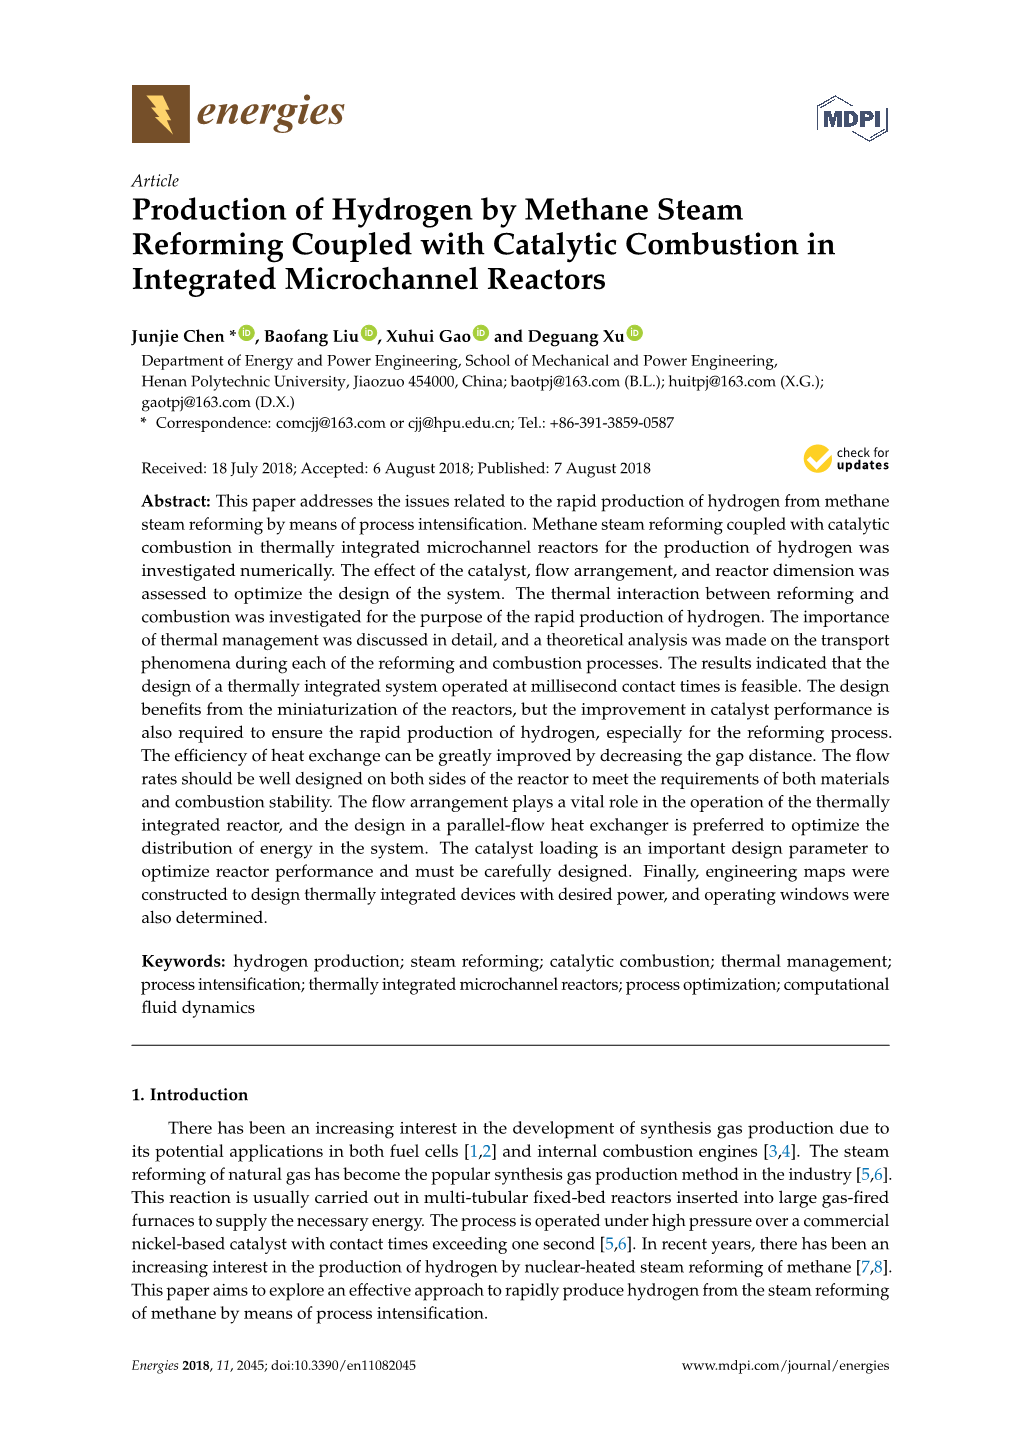 Production of Hydrogen by Methane Steam Reforming Coupled with Catalytic Combustion in Integrated Microchannel Reactors